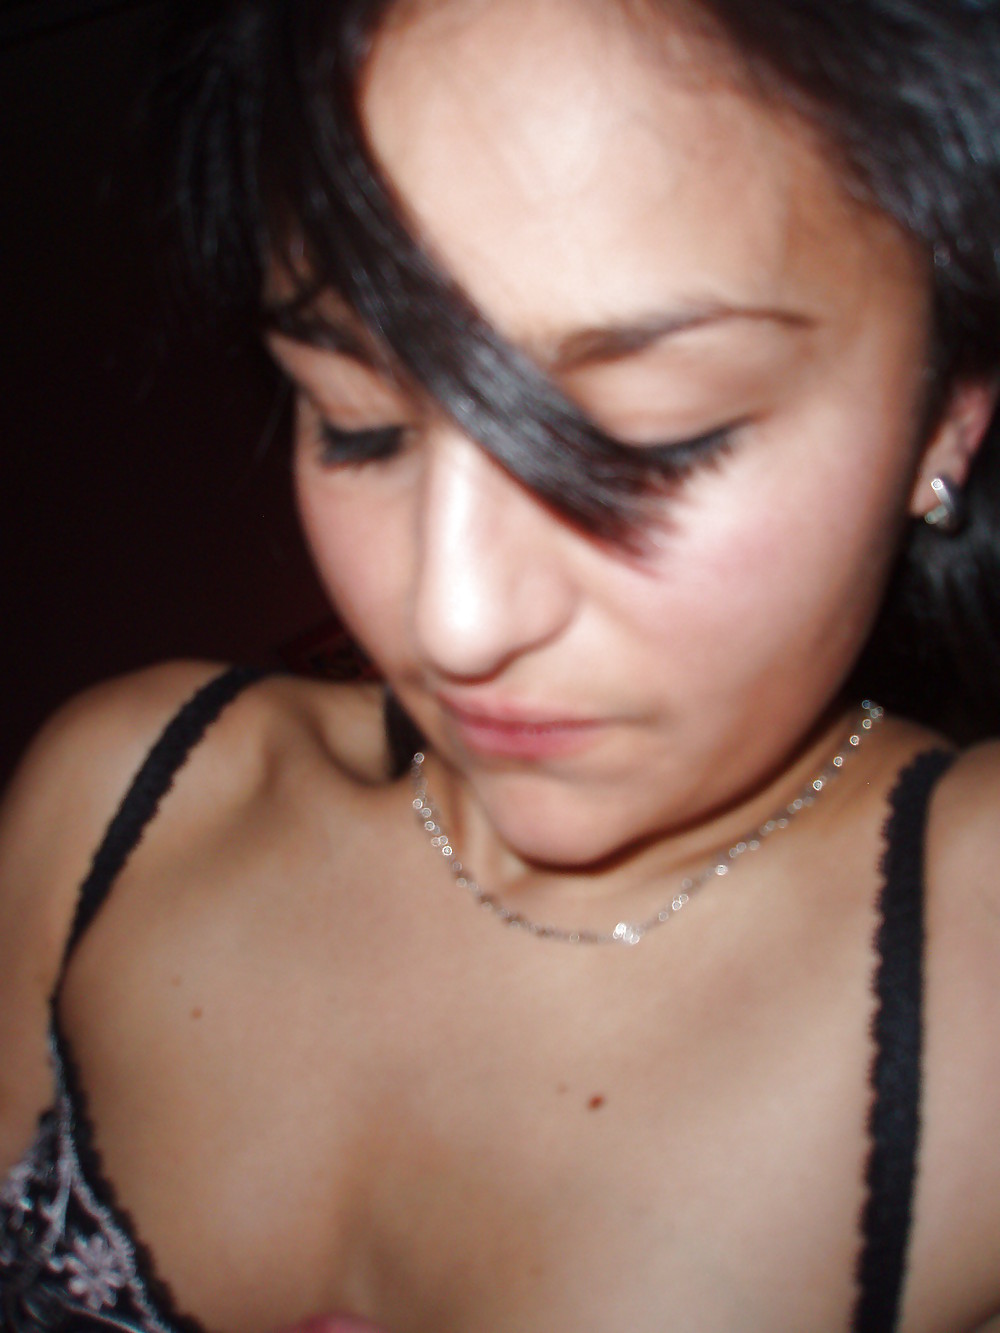 MADE IN GERMANY - Guersel adult photos